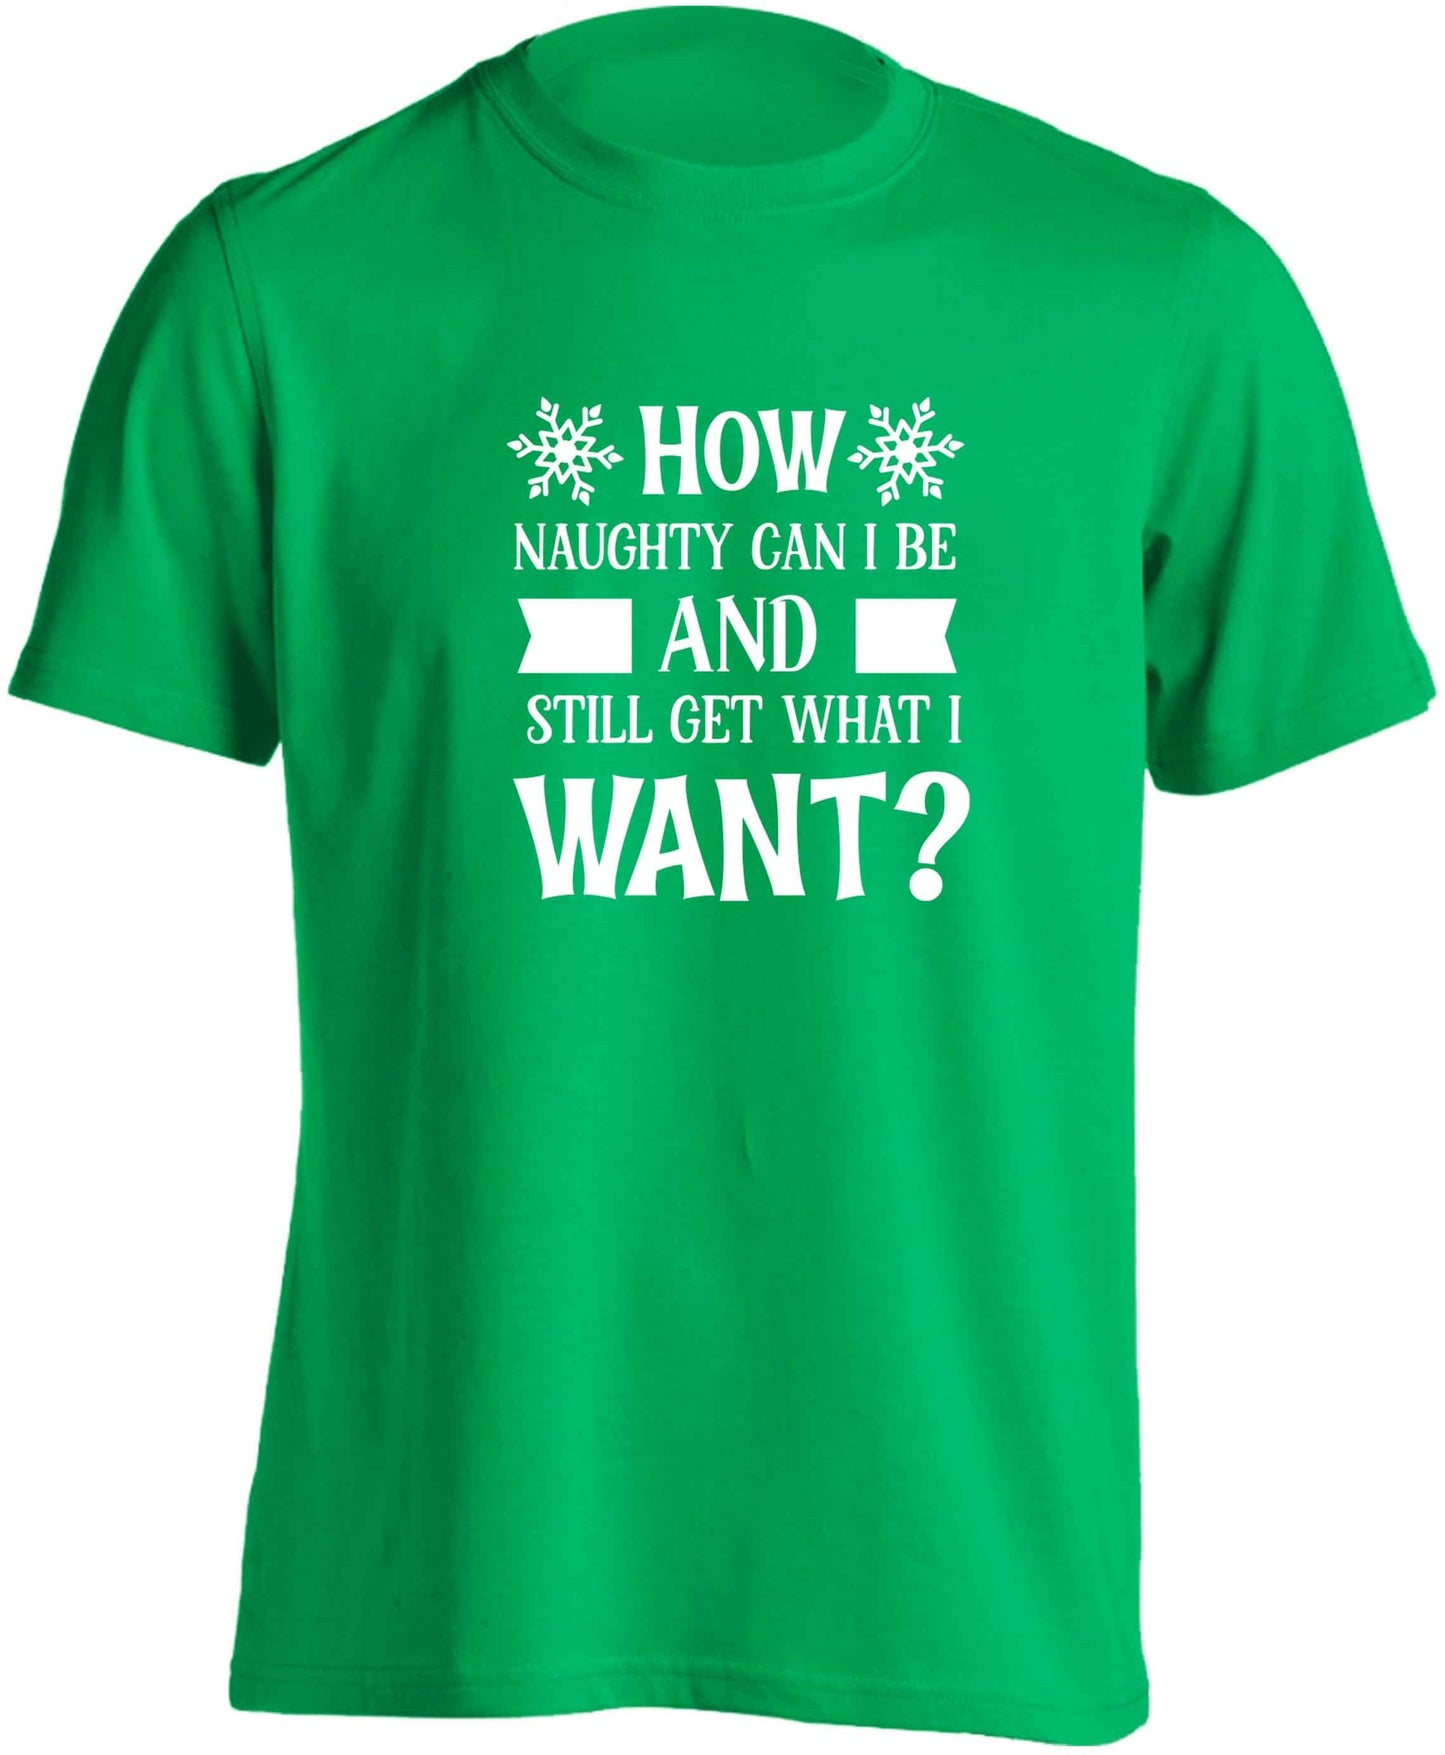 How naughty can I be and still get what I want? adults unisex green Tshirt 2XL